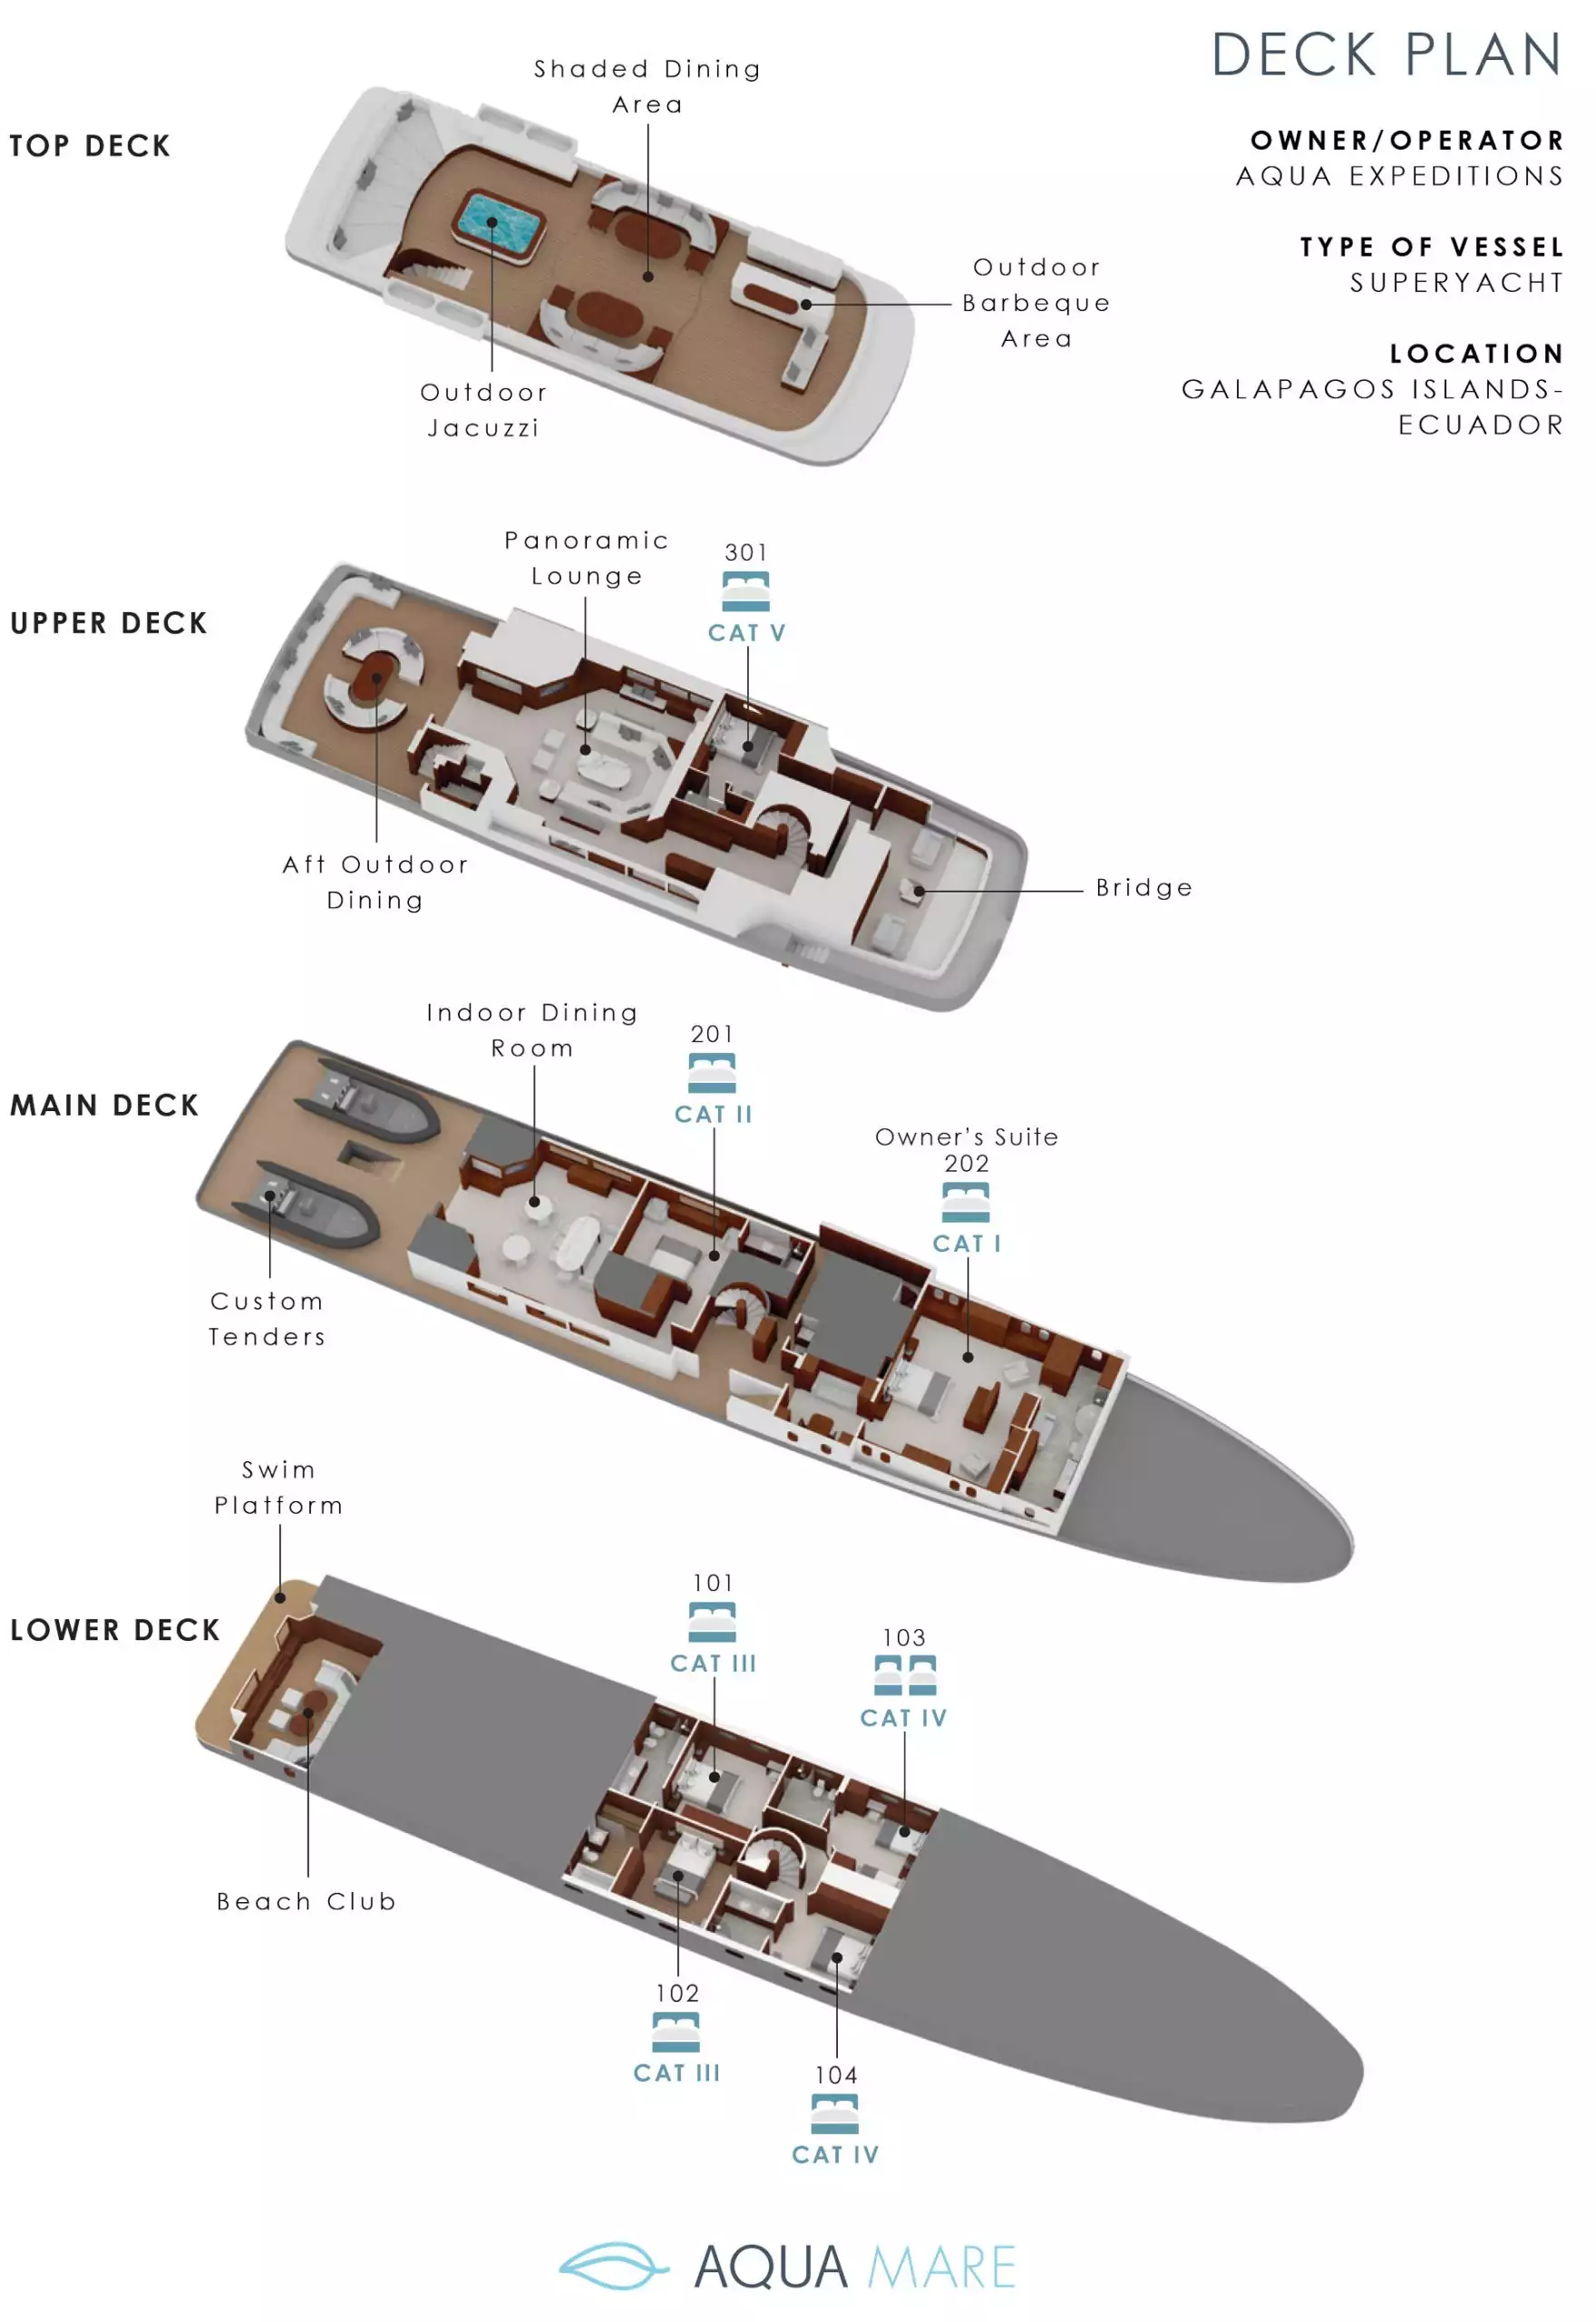 Deck plan of Aqua Mare Galapagos superyacht with 4 guest decks & 7 suites.